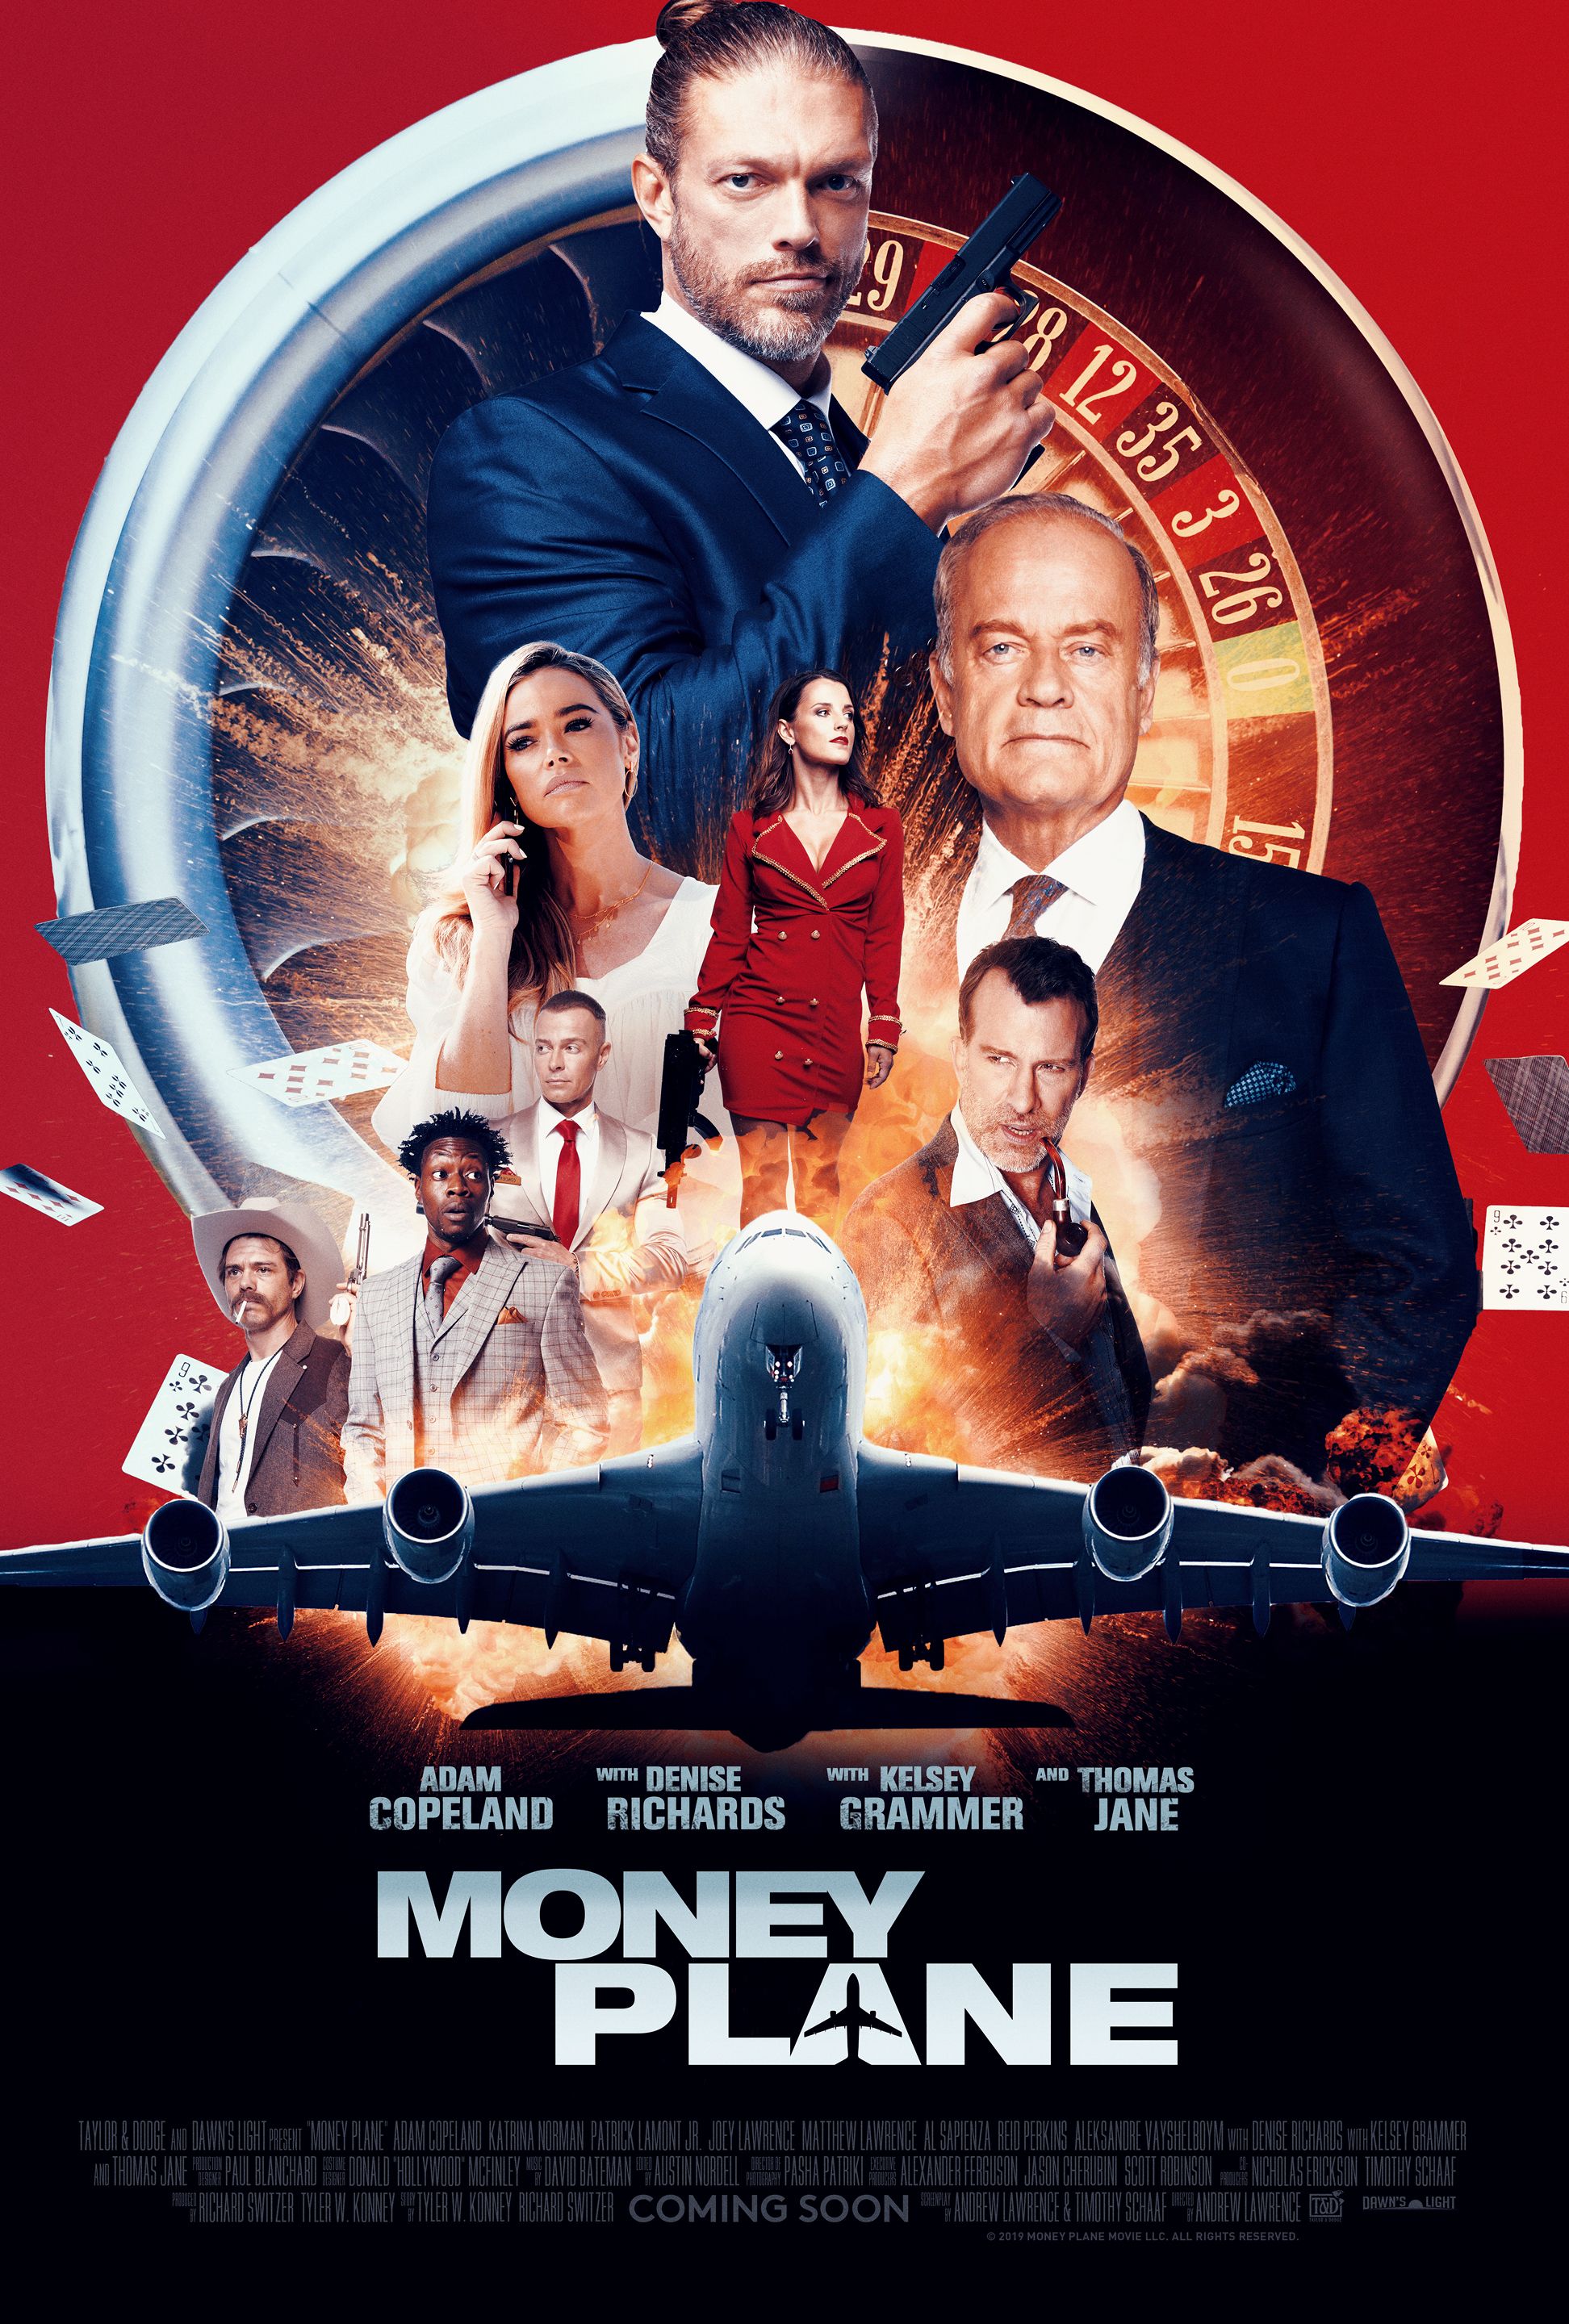 Money Plane Poster Teases The Next Crazy Action Movie [EXCLUSIVE]